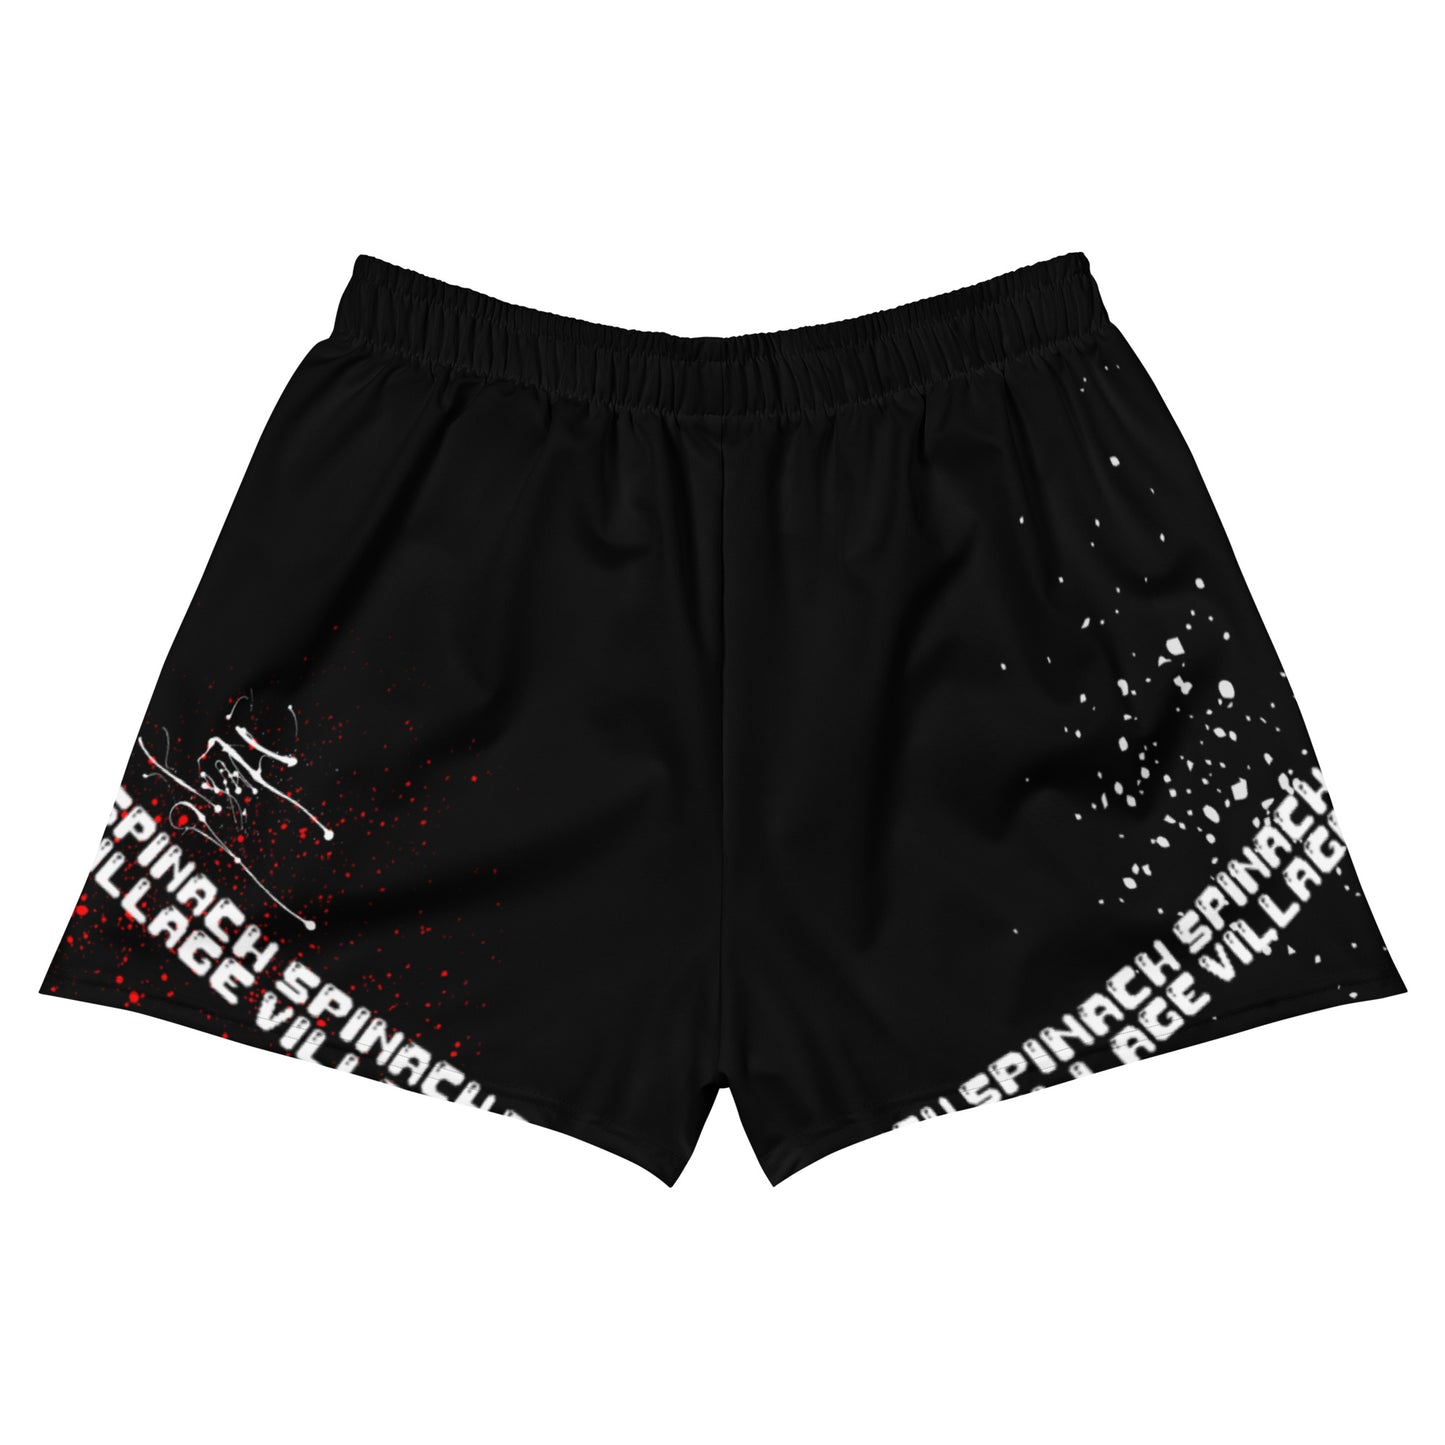 [Shock Factor] - Women’s (Recycled) Athletic Shorts